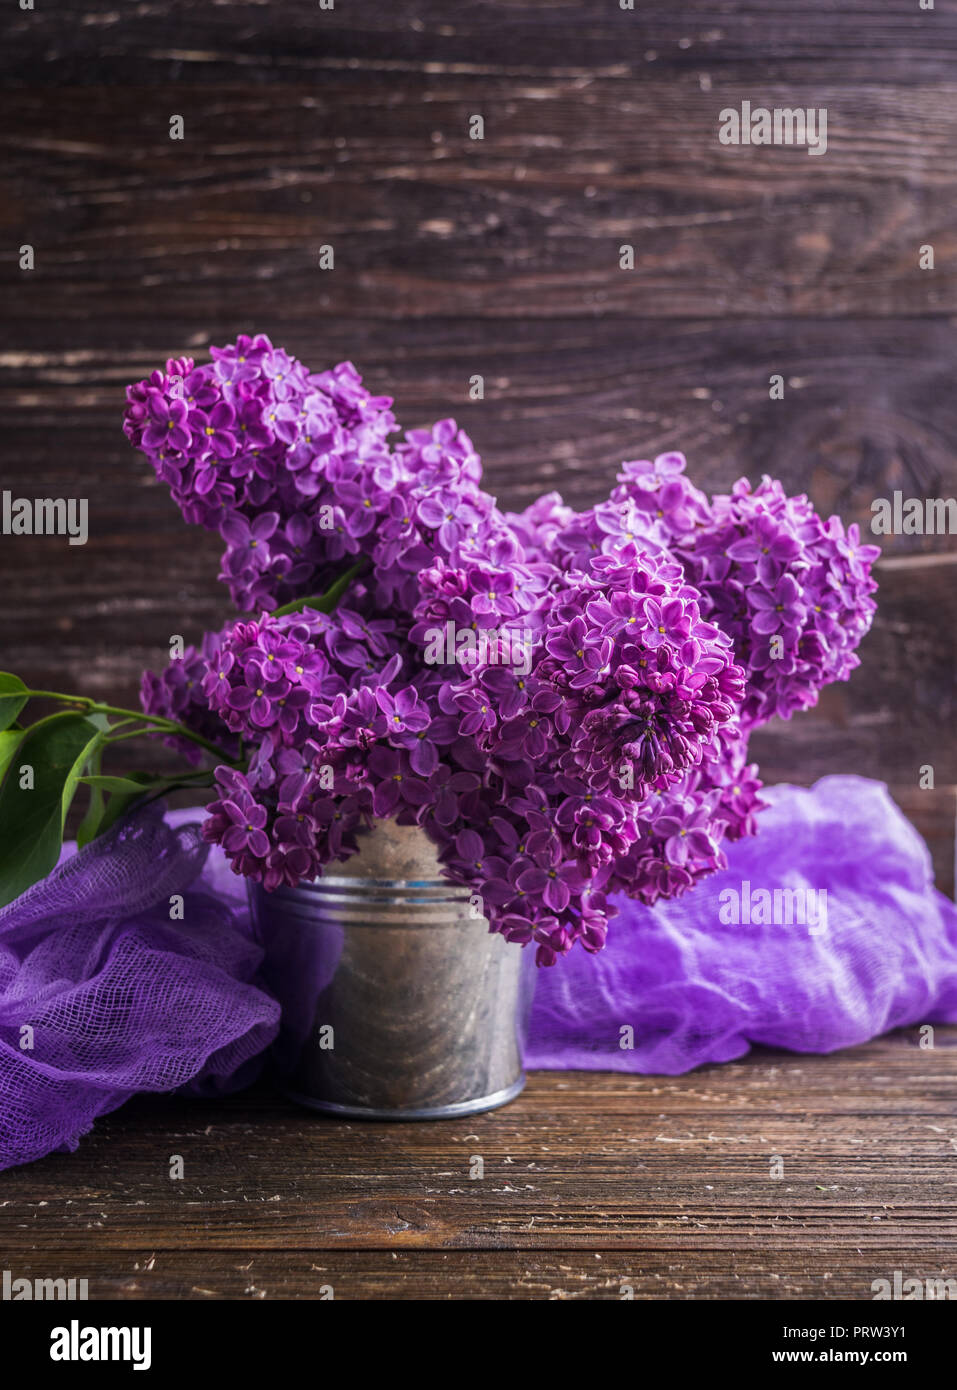 Bouquet of purple lilac flowers in small decorative tin bucket with purple dyed gauze fabric. Dark brown wooden background. Spring romantic flowers de Stock Photo